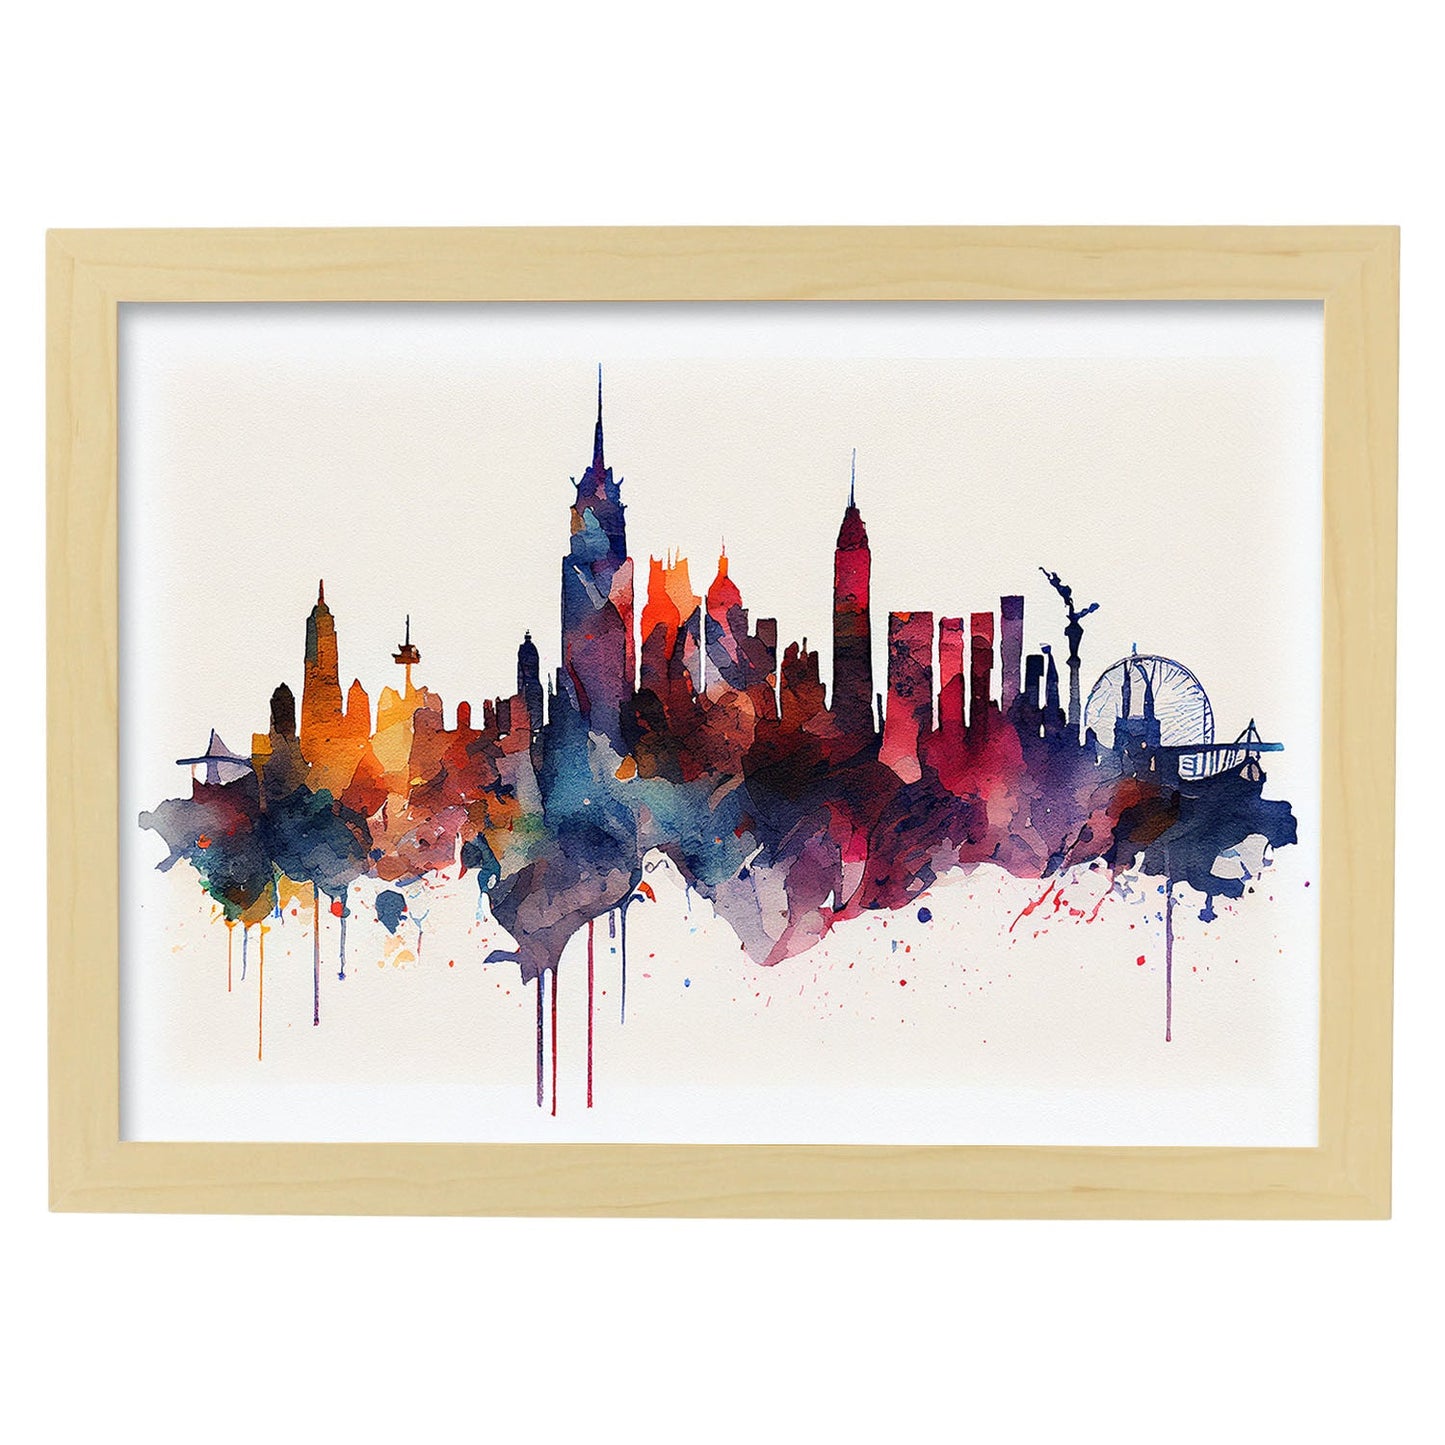 Nacnic watercolor of a skyline of the city of New York_1. Aesthetic Wall Art Prints for Bedroom or Living Room Design.-Artwork-Nacnic-A4-Marco Madera Clara-Nacnic Estudio SL